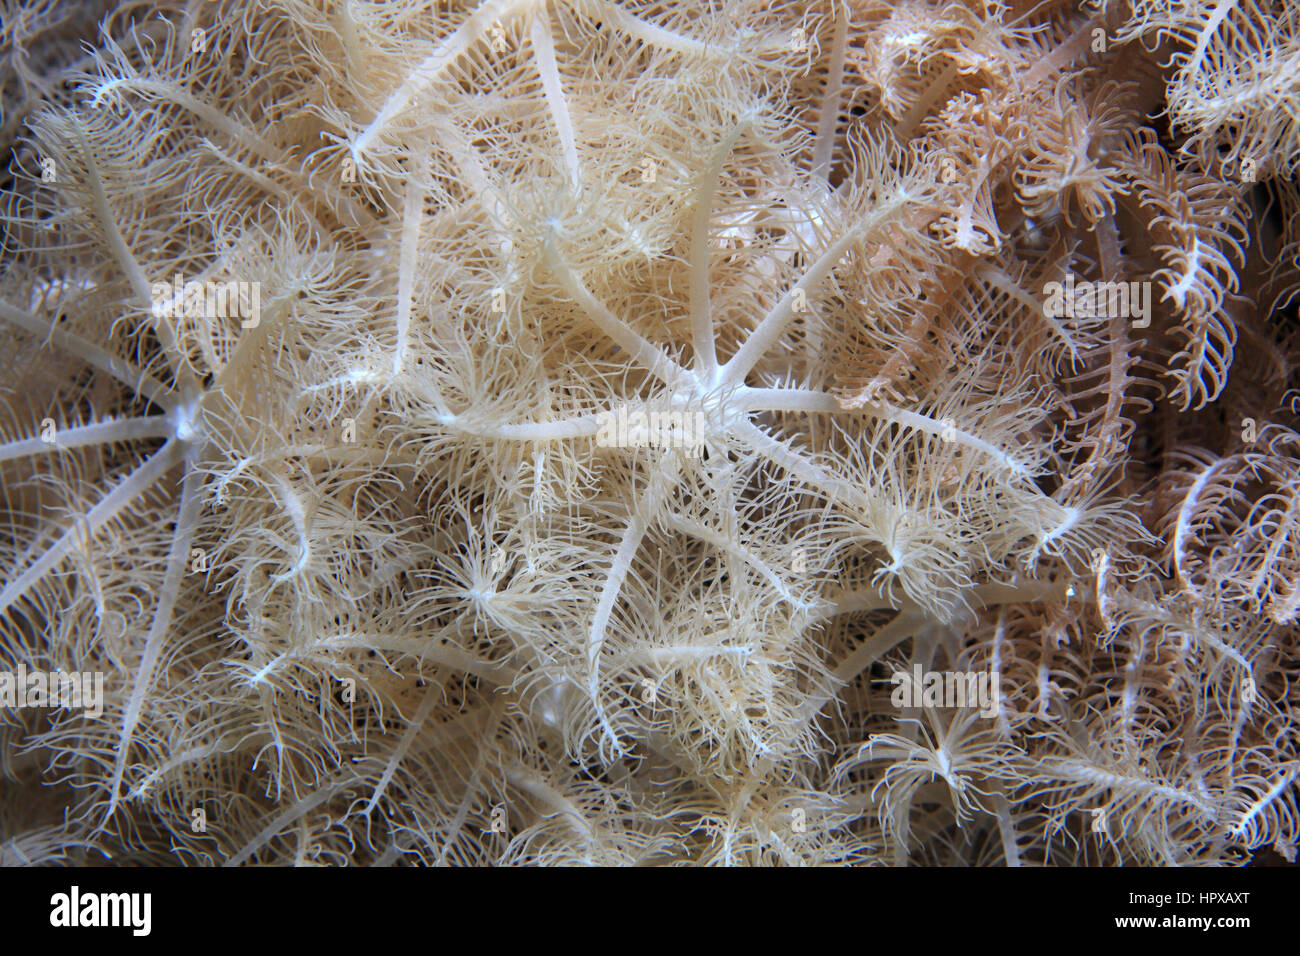 Anthelia soft coral polyps (Anthelia sp.) underwater in the coral reef of the Red Sea Stock Photo